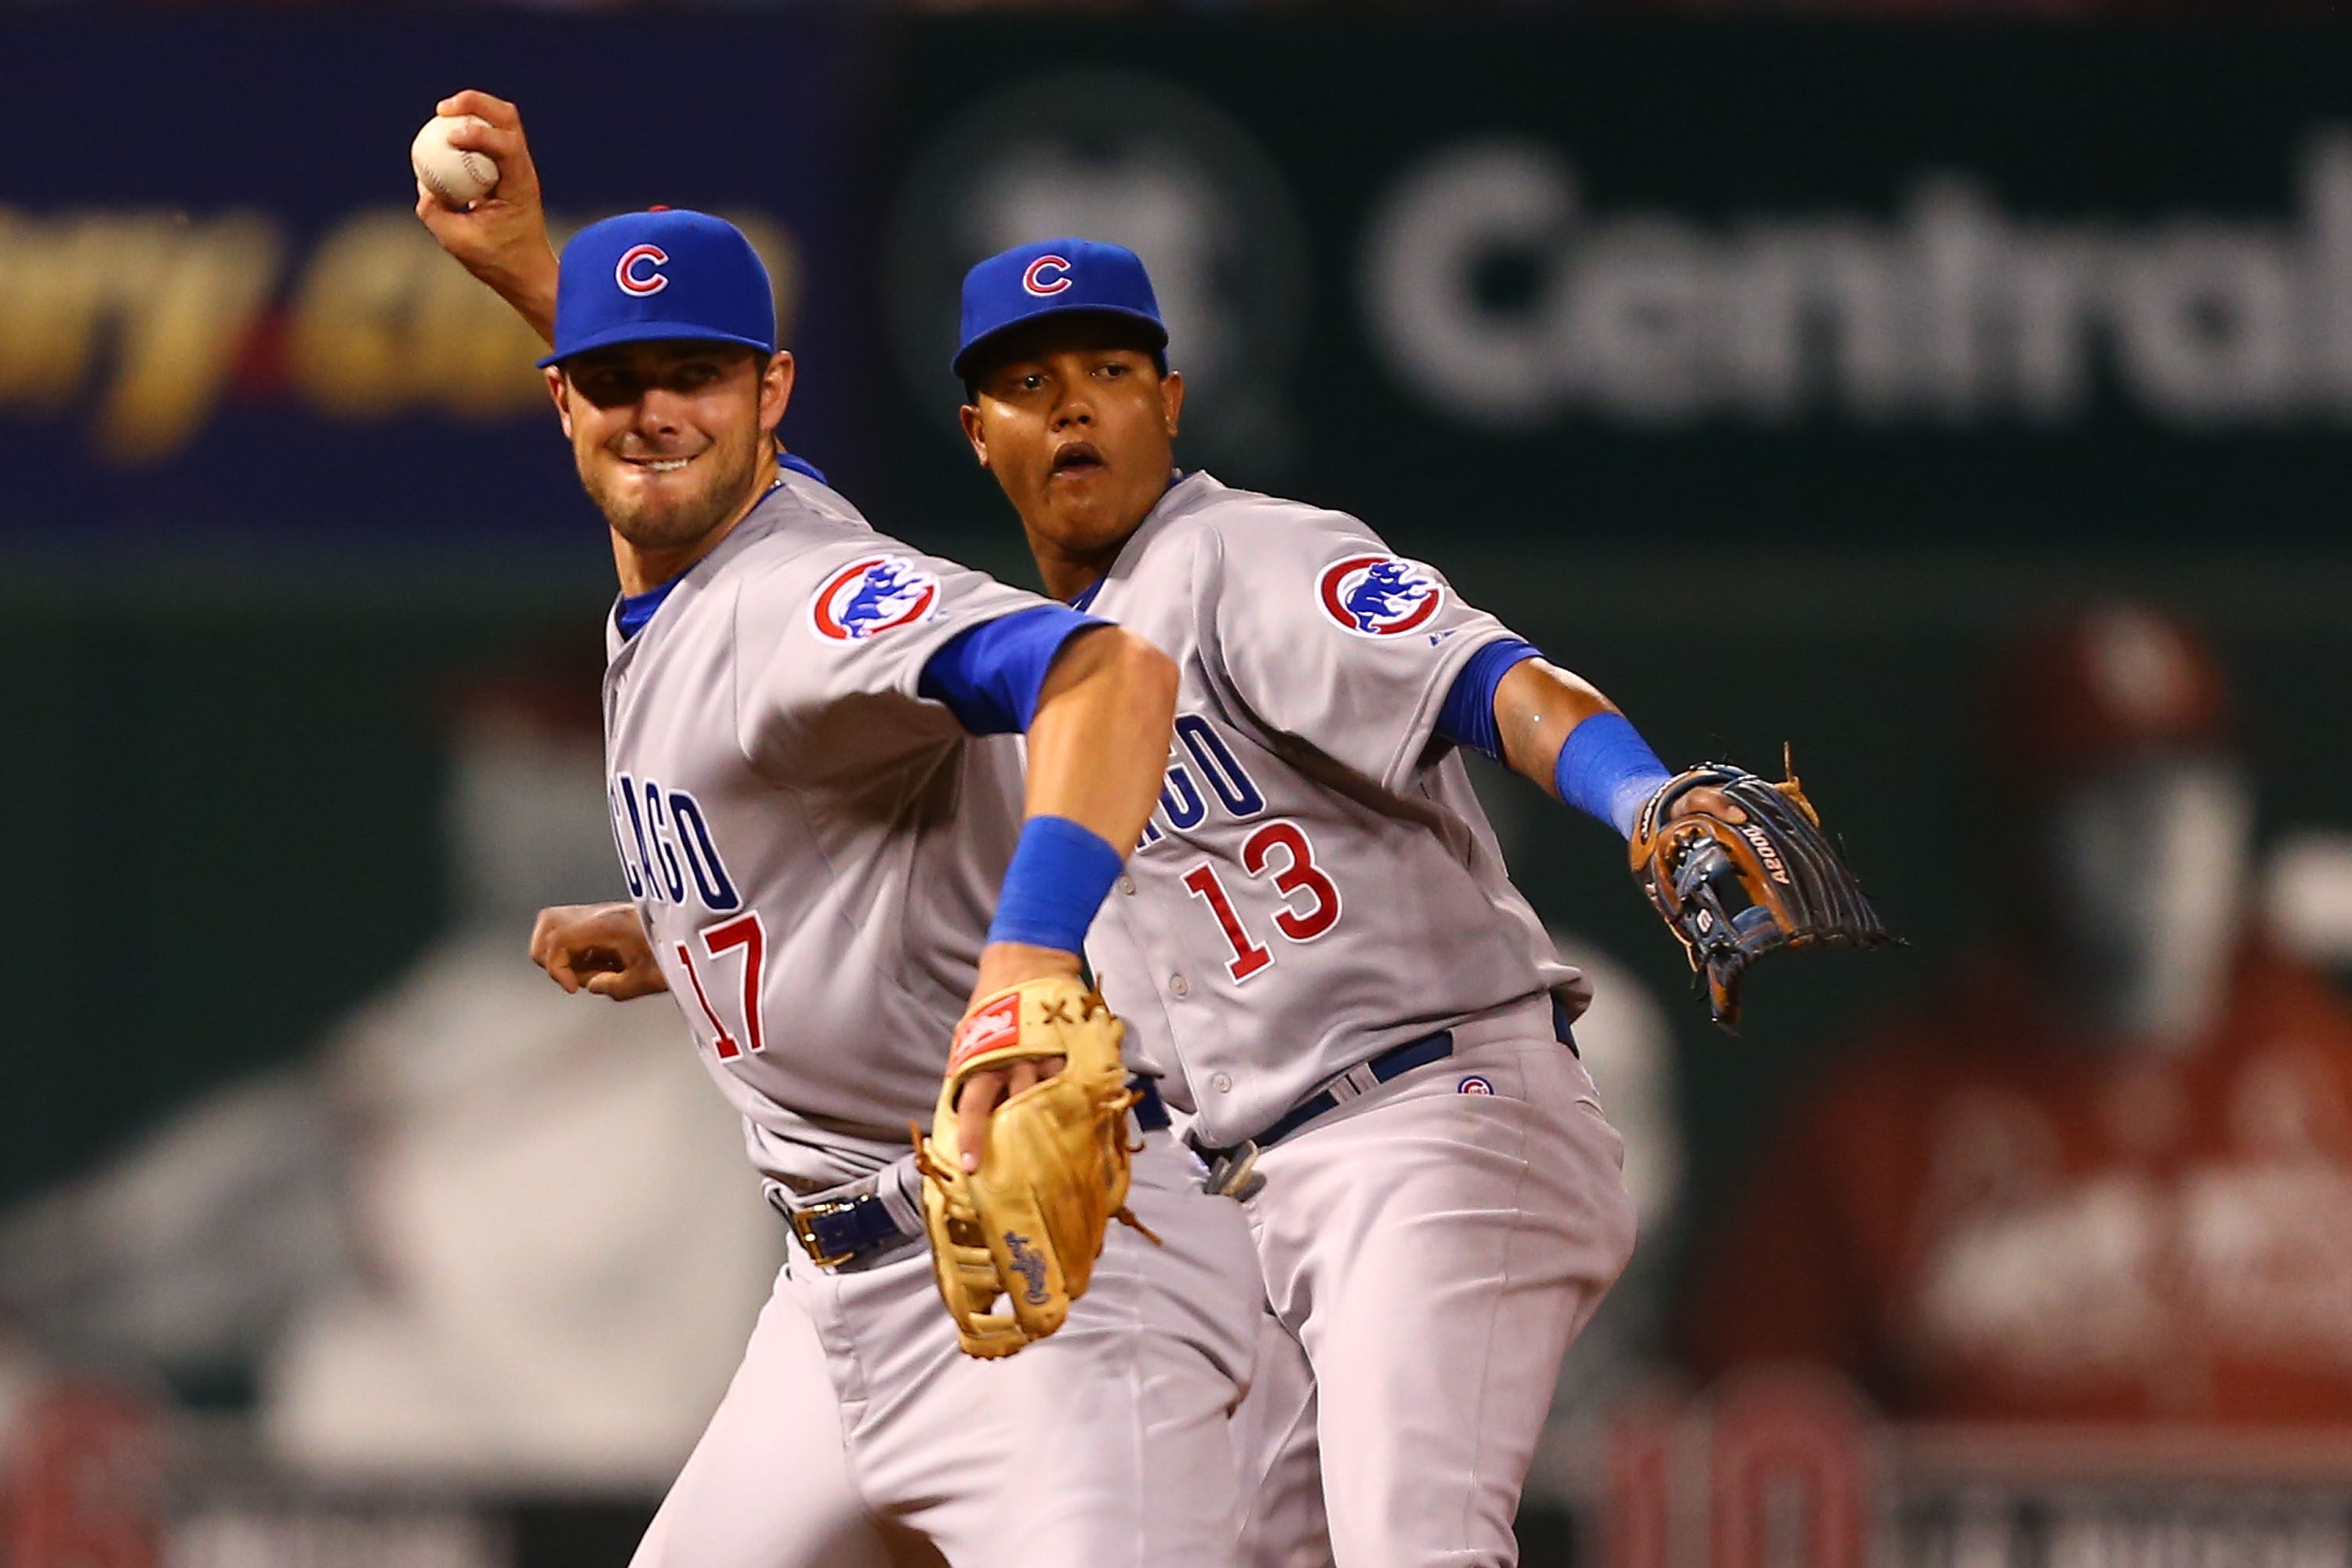 Starlin Castro perfectly mimics Kris Bryant as he fields an